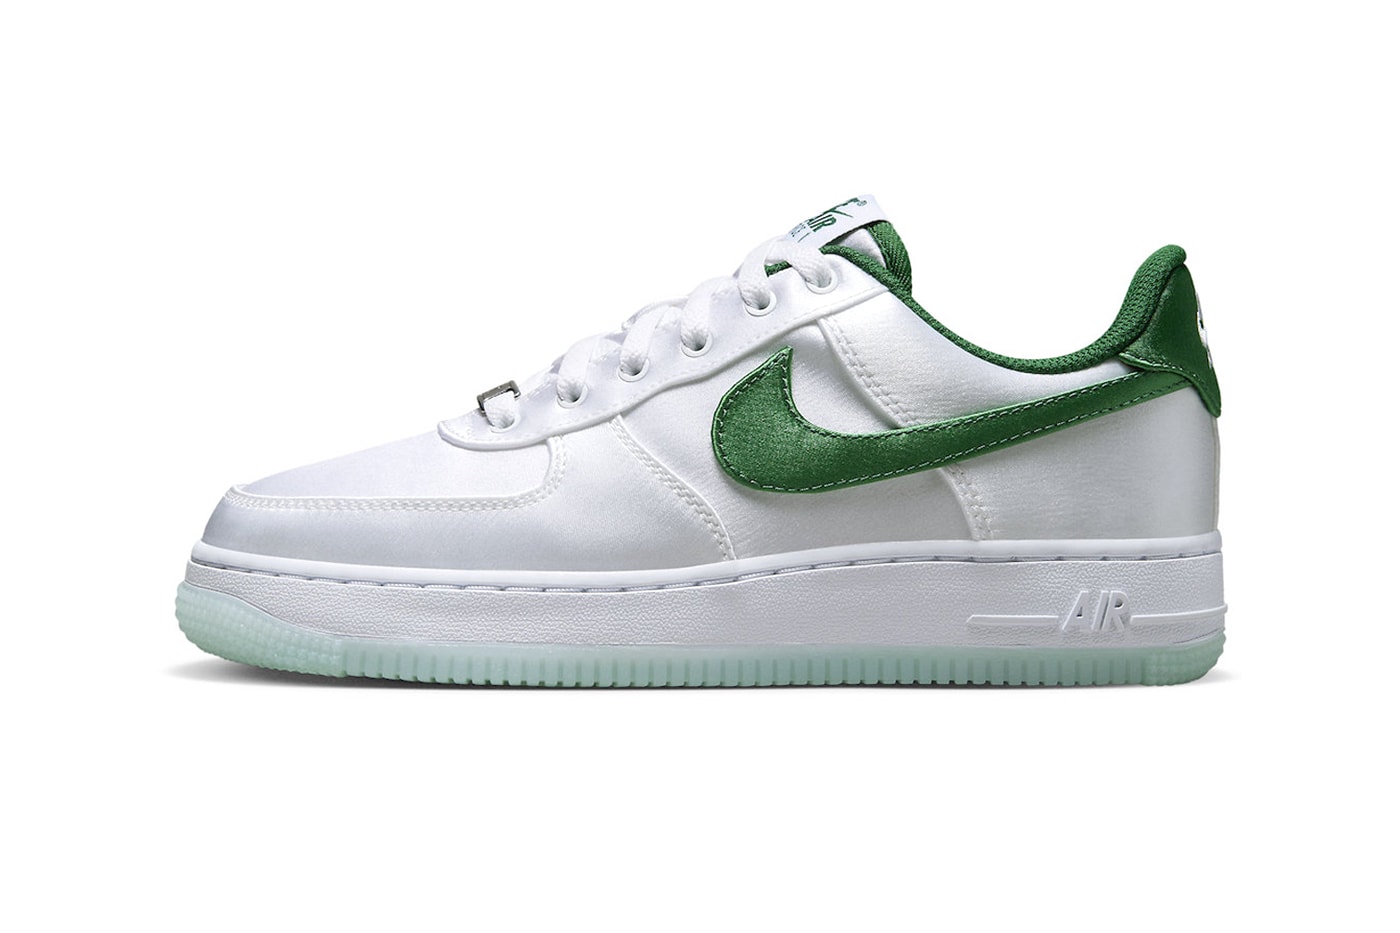 Nike Air Force 1 Low "Satin" White/Green DX6541-101 Release staple white sneakers summer shoes af1